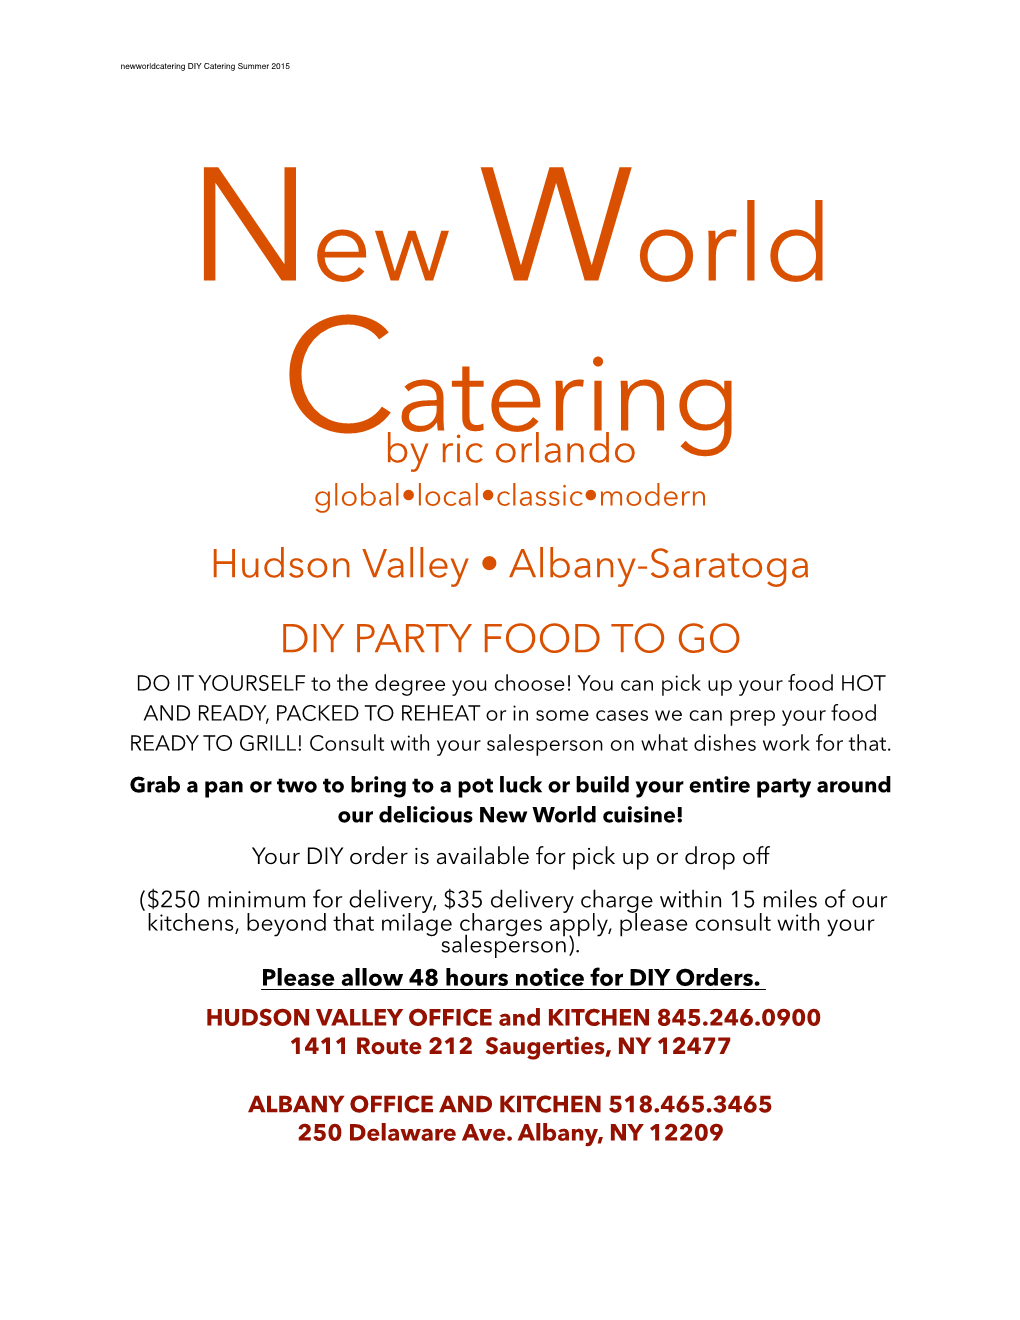 NEW WORLD CATERING HUDSON VALLEY OFFICE and CAFE 845.246.0900 1411 Route 212 Saugerties, NY 12477